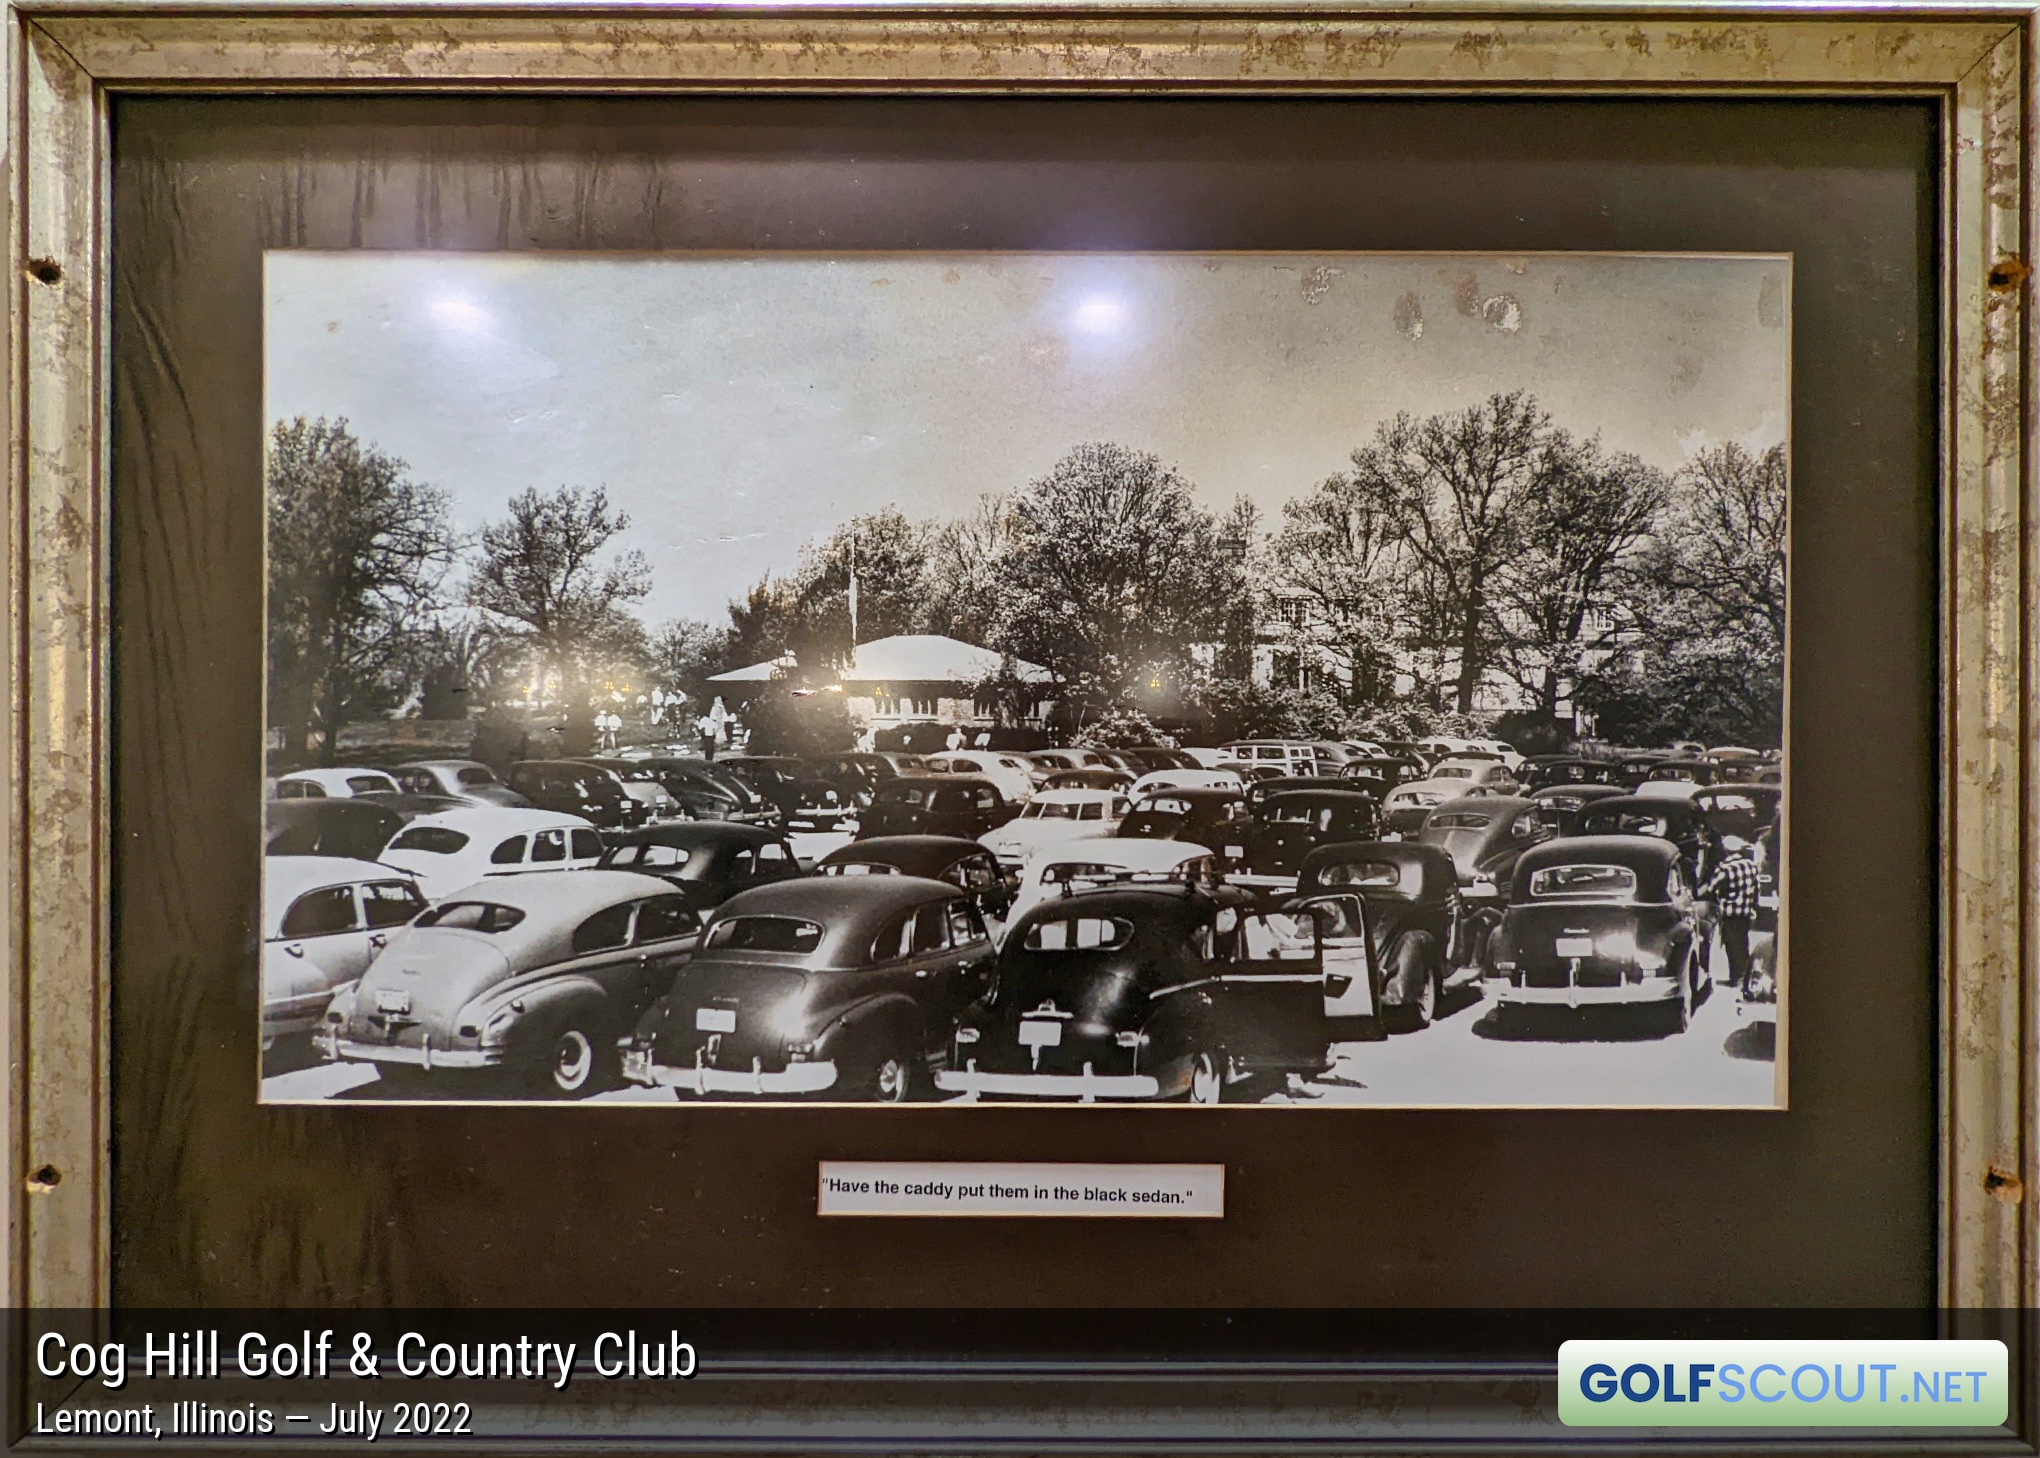 Miscellaneous photo of Cog Hill Course #4 - Dubsdread in Lemont, Illinois. "Have the caddy put them in the black sedan." This framed photo is in the basement of the main clubhouse.